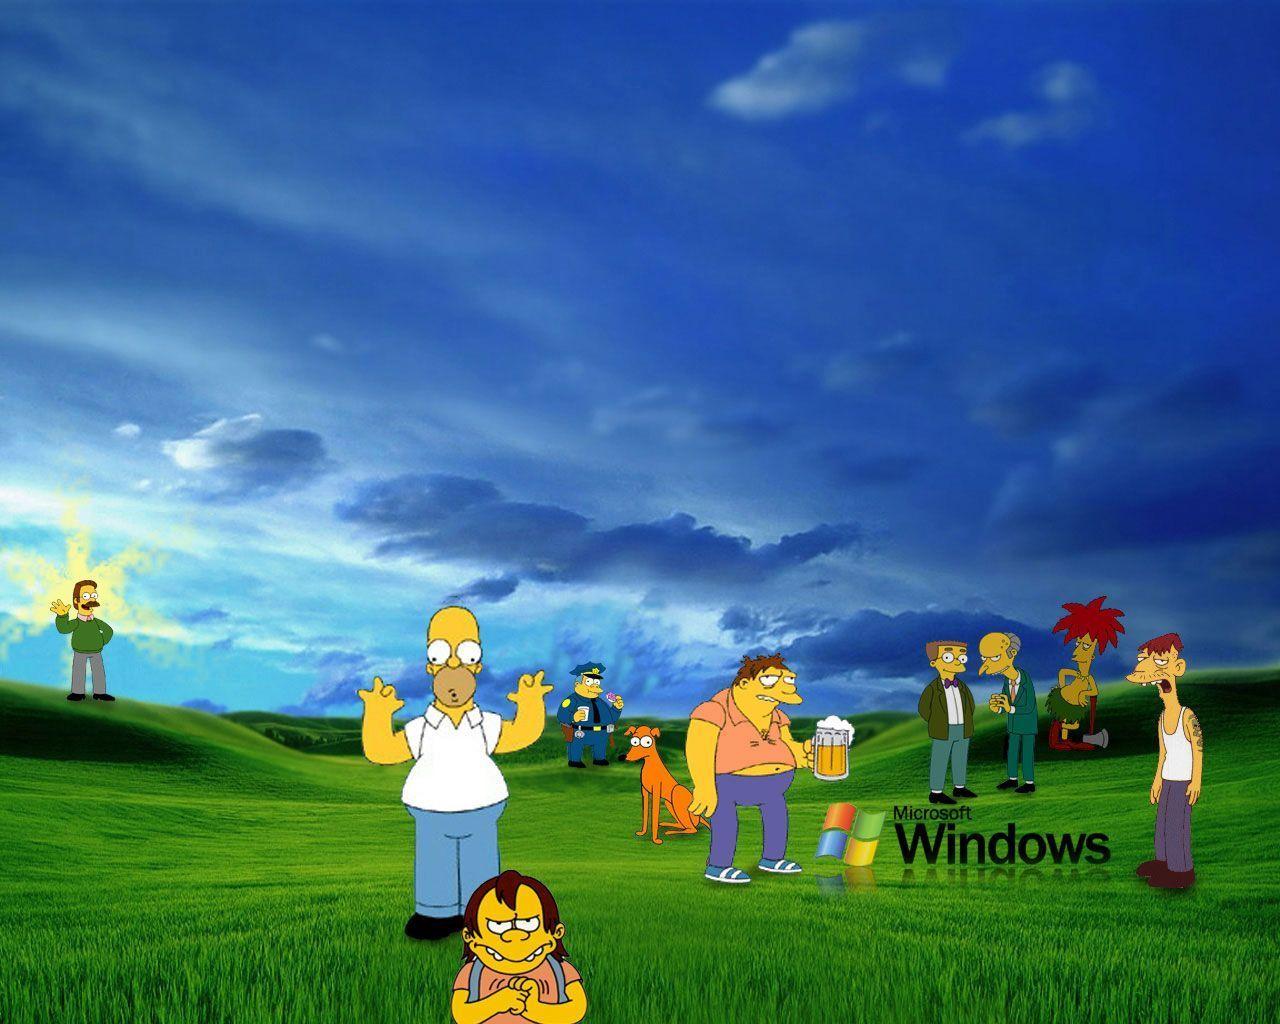 Funny Anti Microsoft Windows Wallpapers Multy Shades 1280×1024 Funny